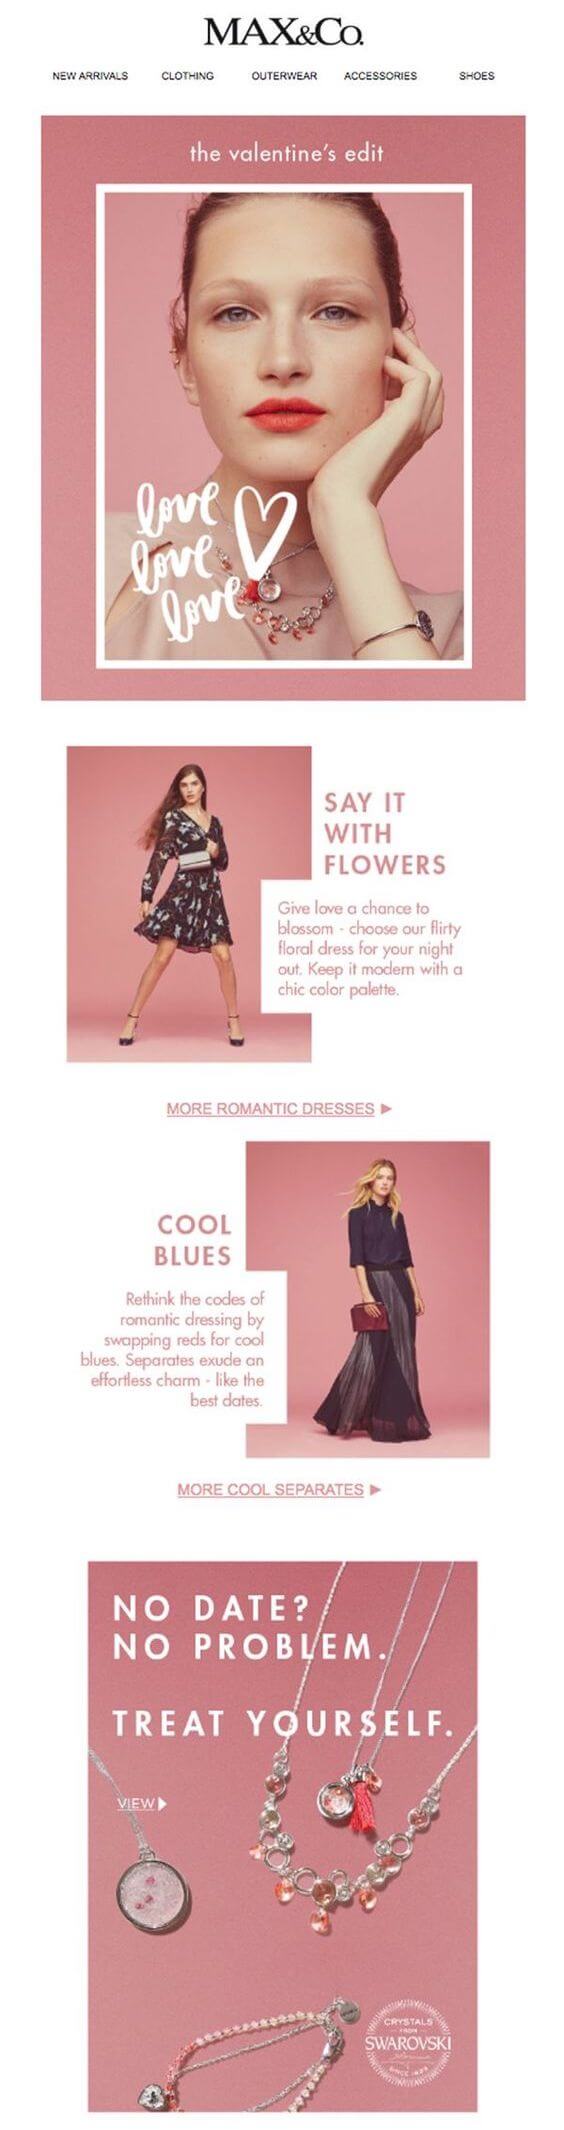 Valentine’s Day email marketing campaign by Max&Co